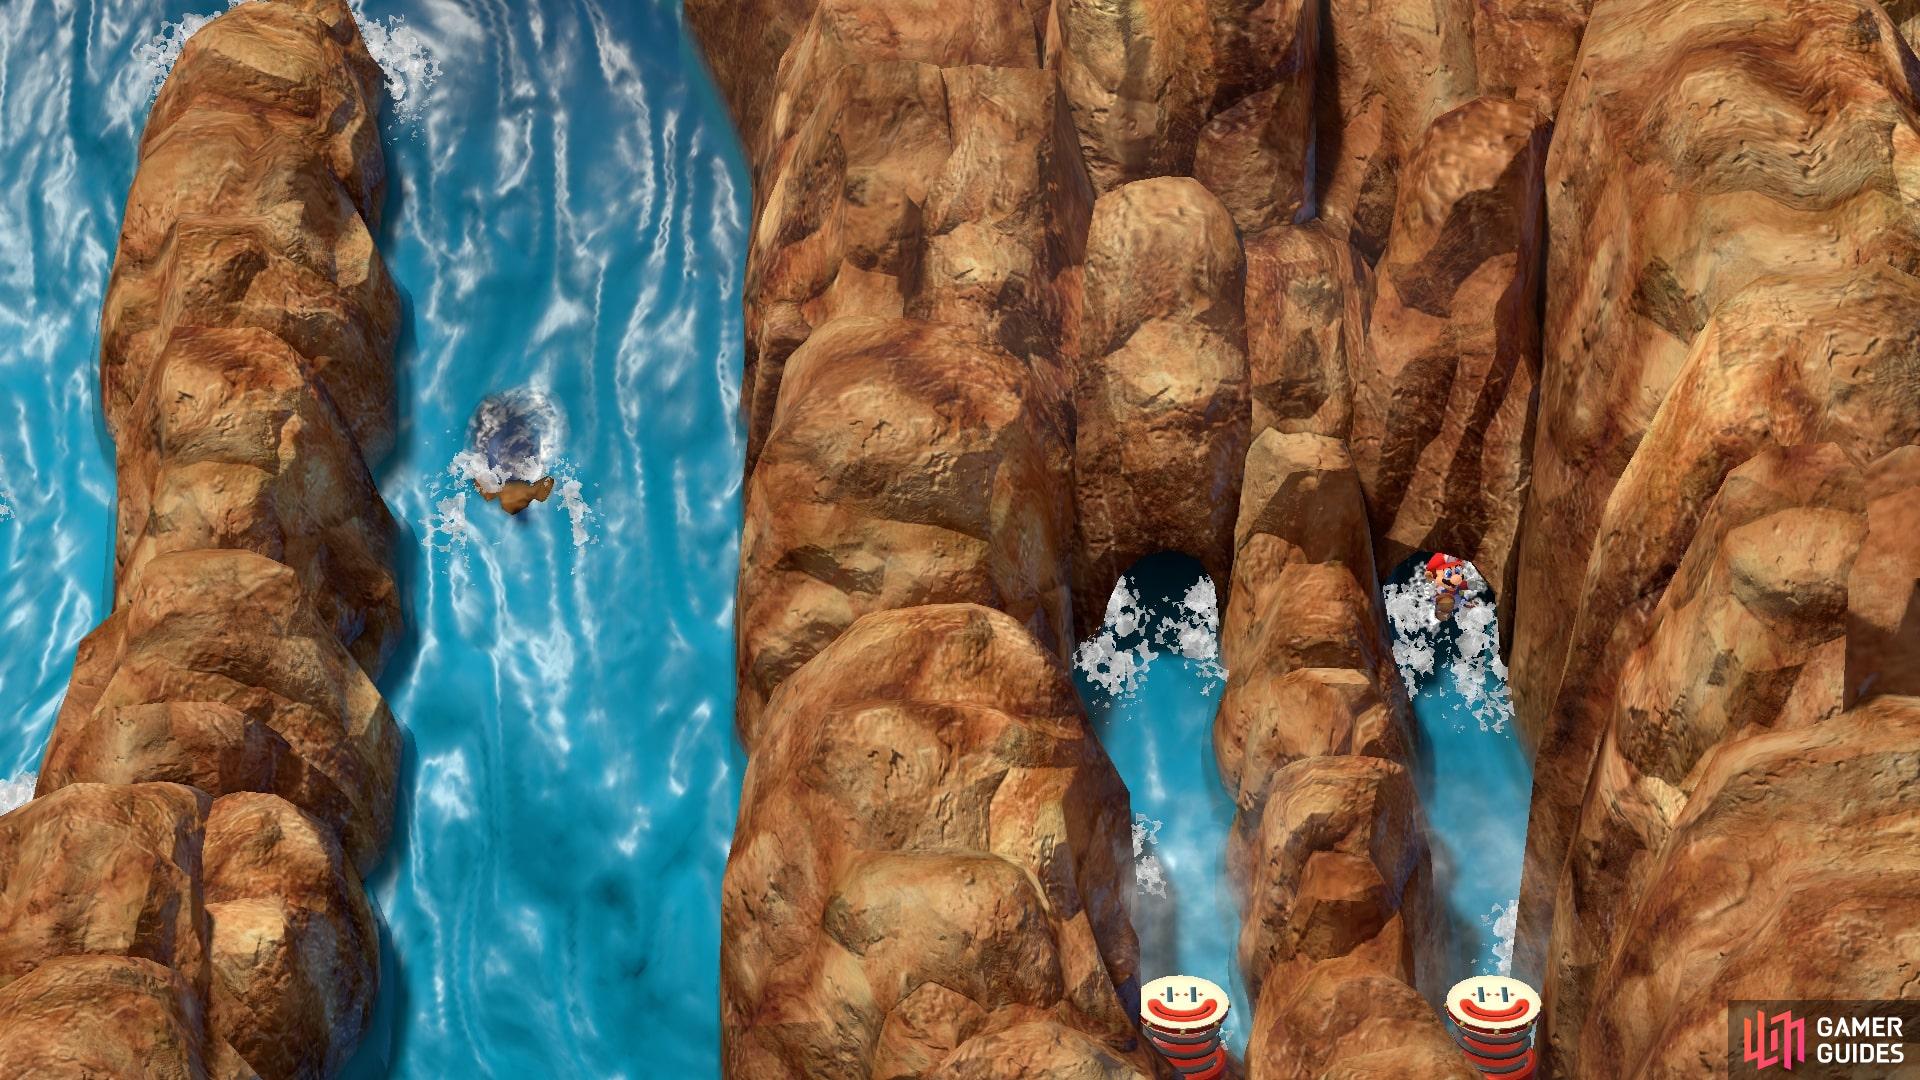 You will come out of the caves using a connected hole on the side of the waterfall.